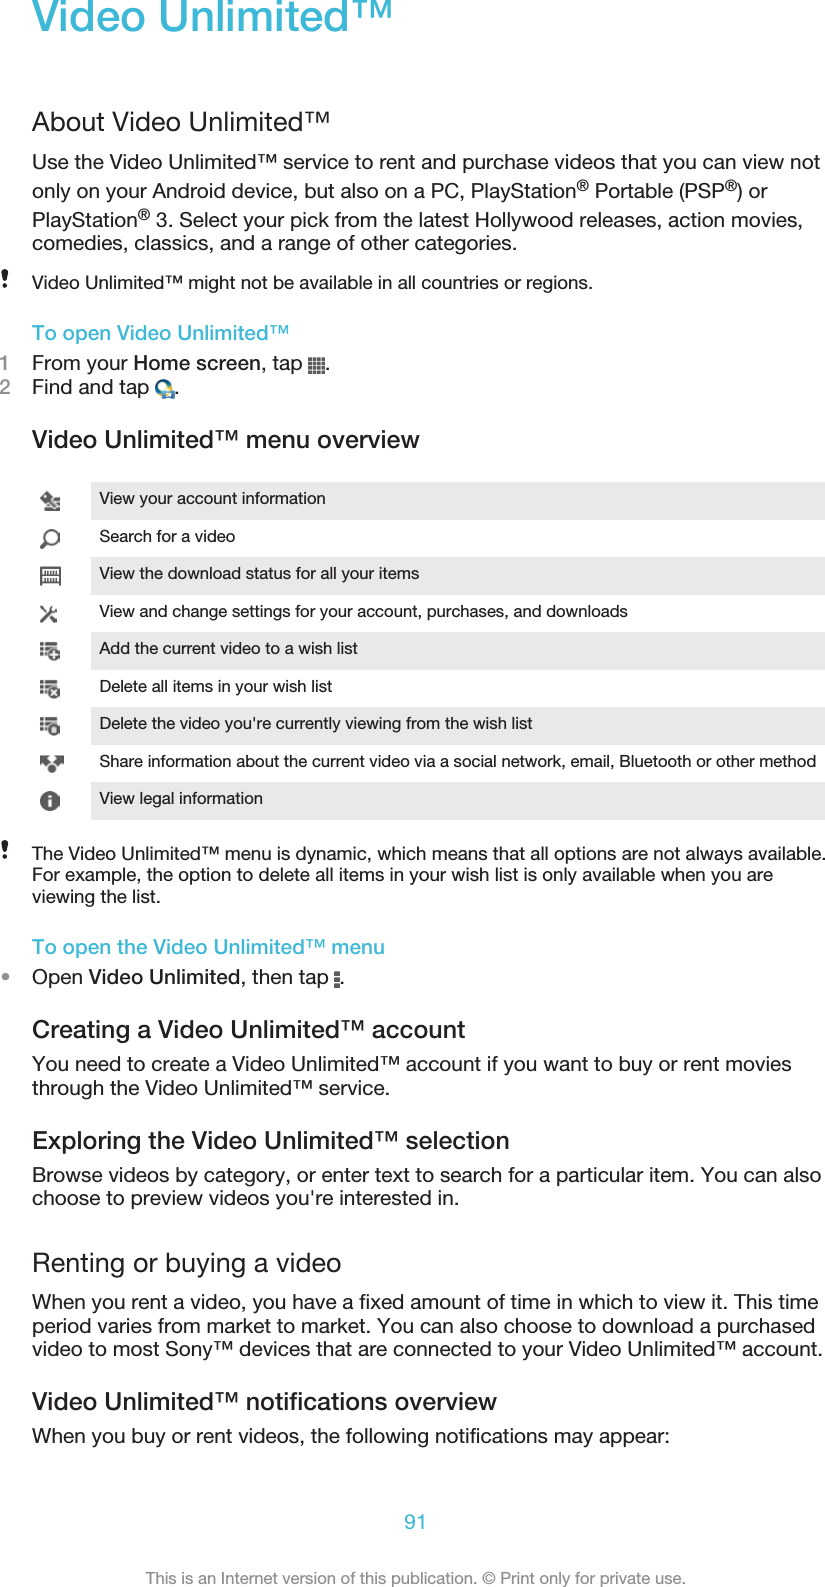 Video Unlimited™About Video Unlimited™Use the Video Unlimited™ service to rent and purchase videos that you can view notonly on your Android device, but also on a PC, PlayStation® Portable (PSP®) orPlayStation® 3. Select your pick from the latest Hollywood releases, action movies,comedies, classics, and a range of other categories.Video Unlimited™ might not be available in all countries or regions.To open Video Unlimited™1From your Home screen, tap  .2Find and tap  .Video Unlimited™ menu overviewView your account informationSearch for a videoView the download status for all your itemsView and change settings for your account, purchases, and downloadsAdd the current video to a wish listDelete all items in your wish listDelete the video you&apos;re currently viewing from the wish listShare information about the current video via a social network, email, Bluetooth or other methodView legal informationThe Video Unlimited™ menu is dynamic, which means that all options are not always available.For example, the option to delete all items in your wish list is only available when you areviewing the list.To open the Video Unlimited™ menu•Open Video Unlimited, then tap  .Creating a Video Unlimited™ accountYou need to create a Video Unlimited™ account if you want to buy or rent moviesthrough the Video Unlimited™ service.Exploring the Video Unlimited™ selectionBrowse videos by category, or enter text to search for a particular item. You can alsochoose to preview videos you&apos;re interested in.Renting or buying a videoWhen you rent a video, you have a fixed amount of time in which to view it. This timeperiod varies from market to market. You can also choose to download a purchasedvideo to most Sony™ devices that are connected to your Video Unlimited™ account.Video Unlimited™ notifications overviewWhen you buy or rent videos, the following notifications may appear:91This is an Internet version of this publication. © Print only for private use.